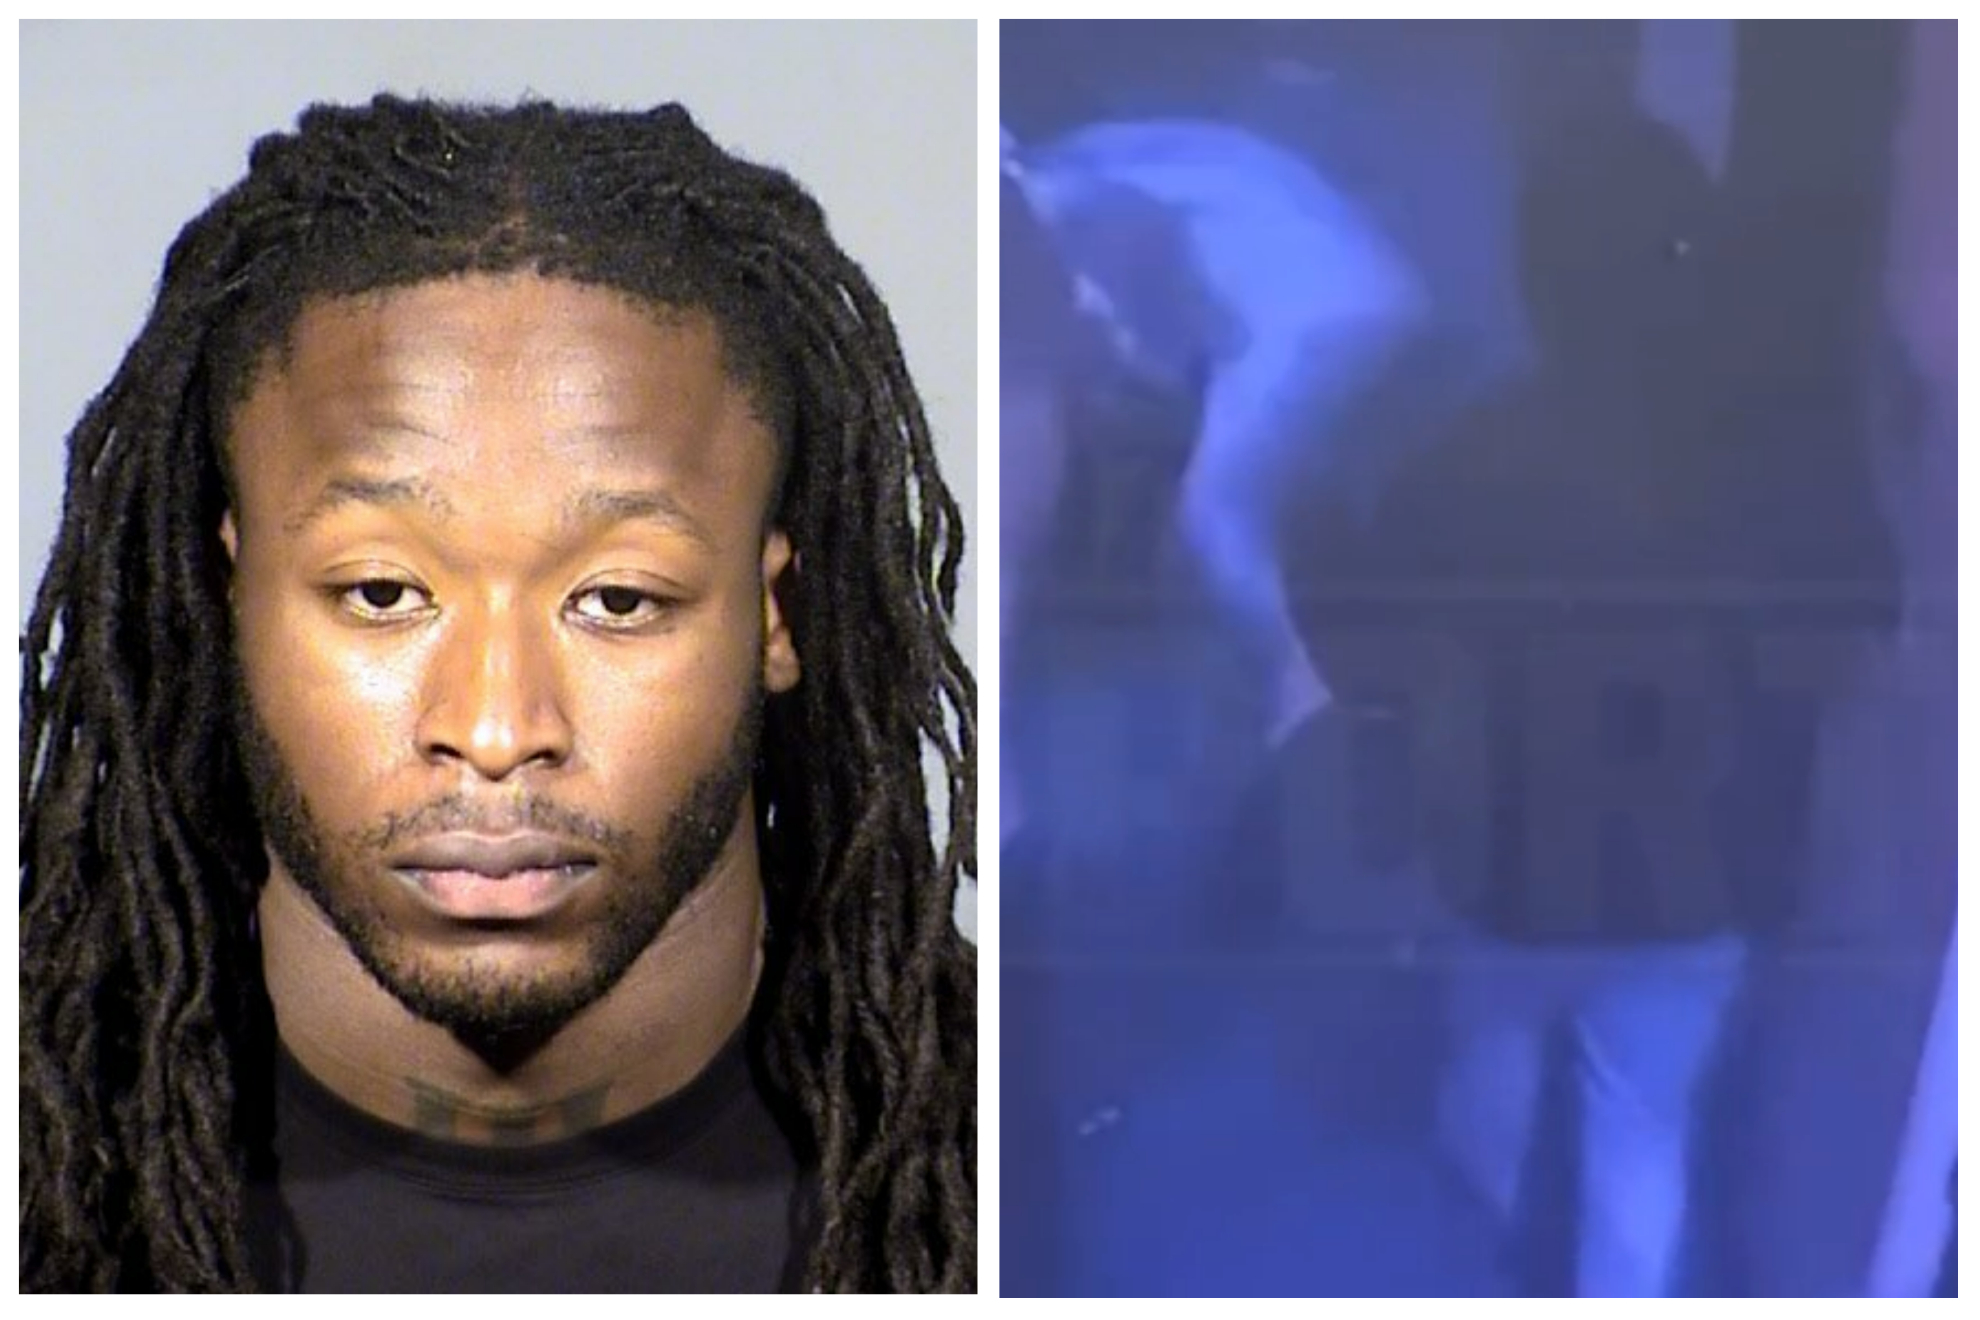 Alvin Kamara is being sued by his victim for $10 million dollars.